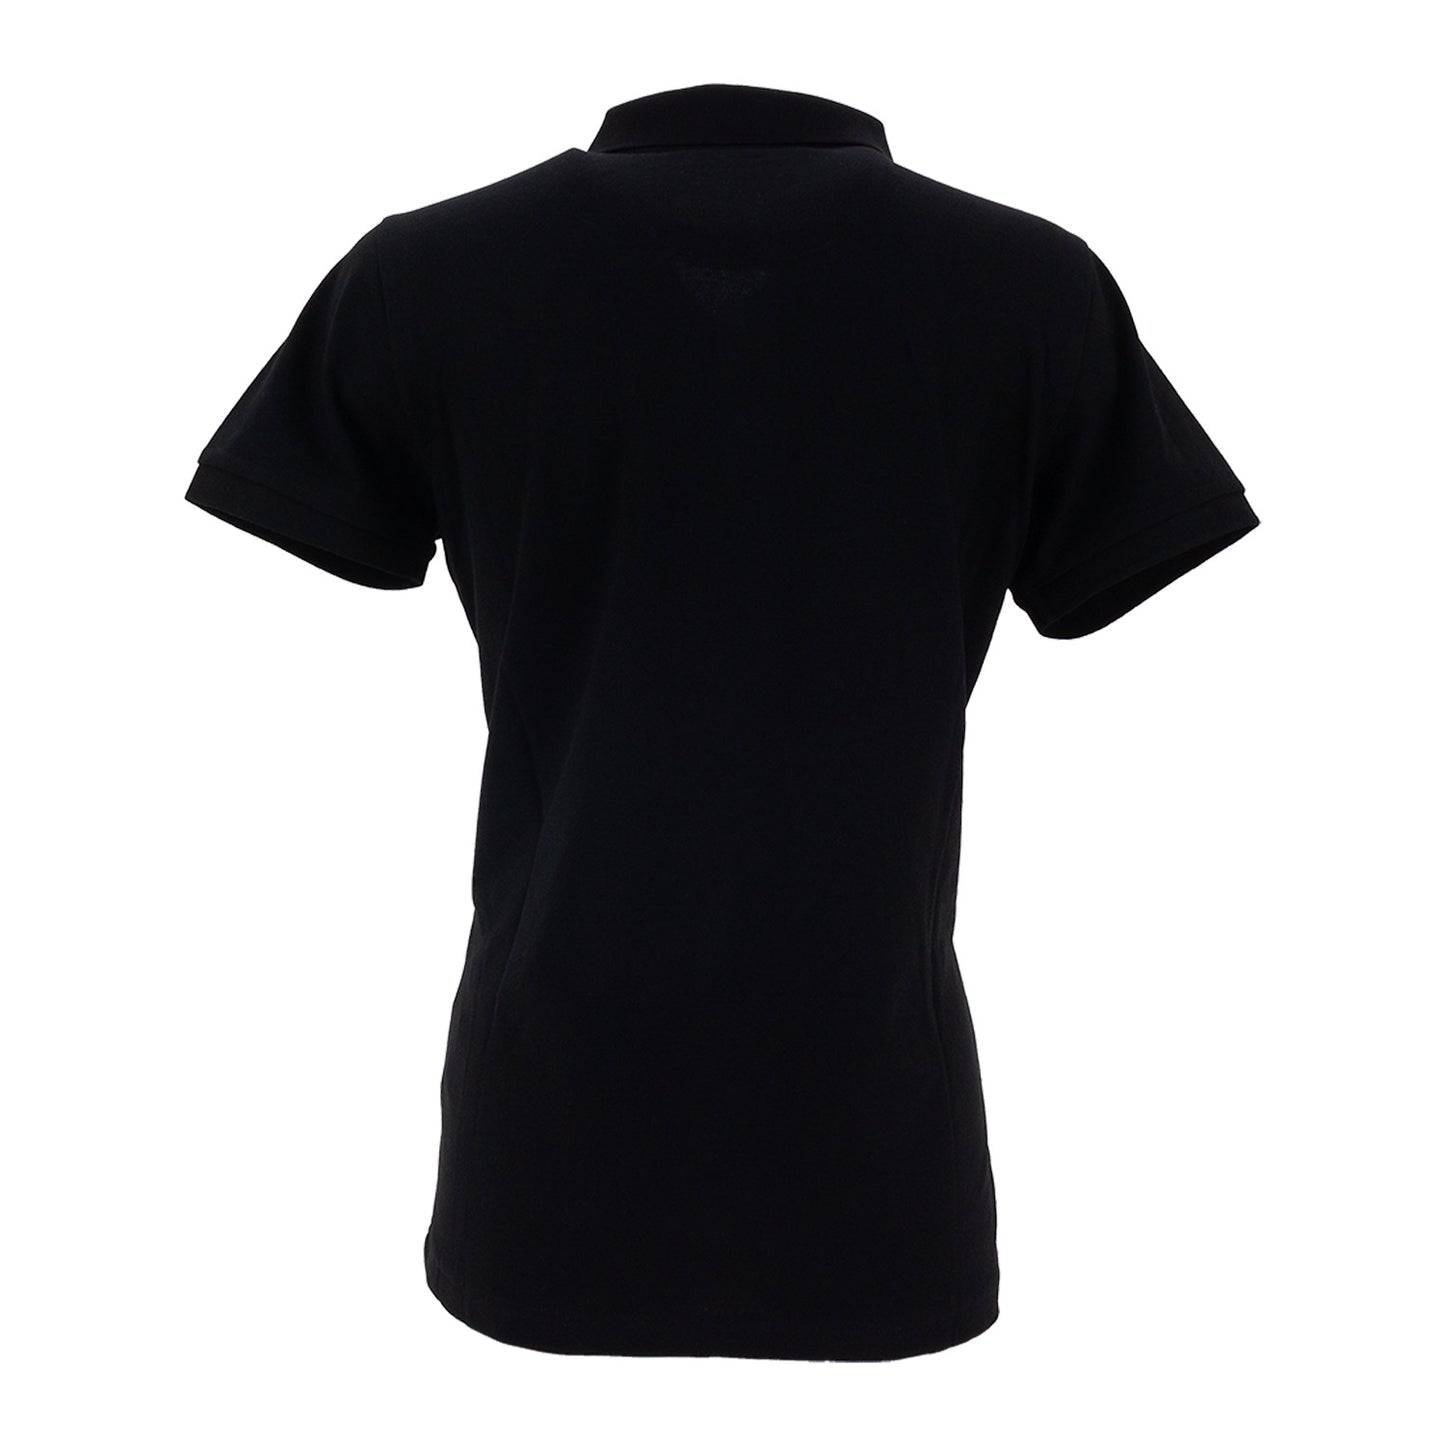 Street Cart Signature Collection - Women's Polo (Black)